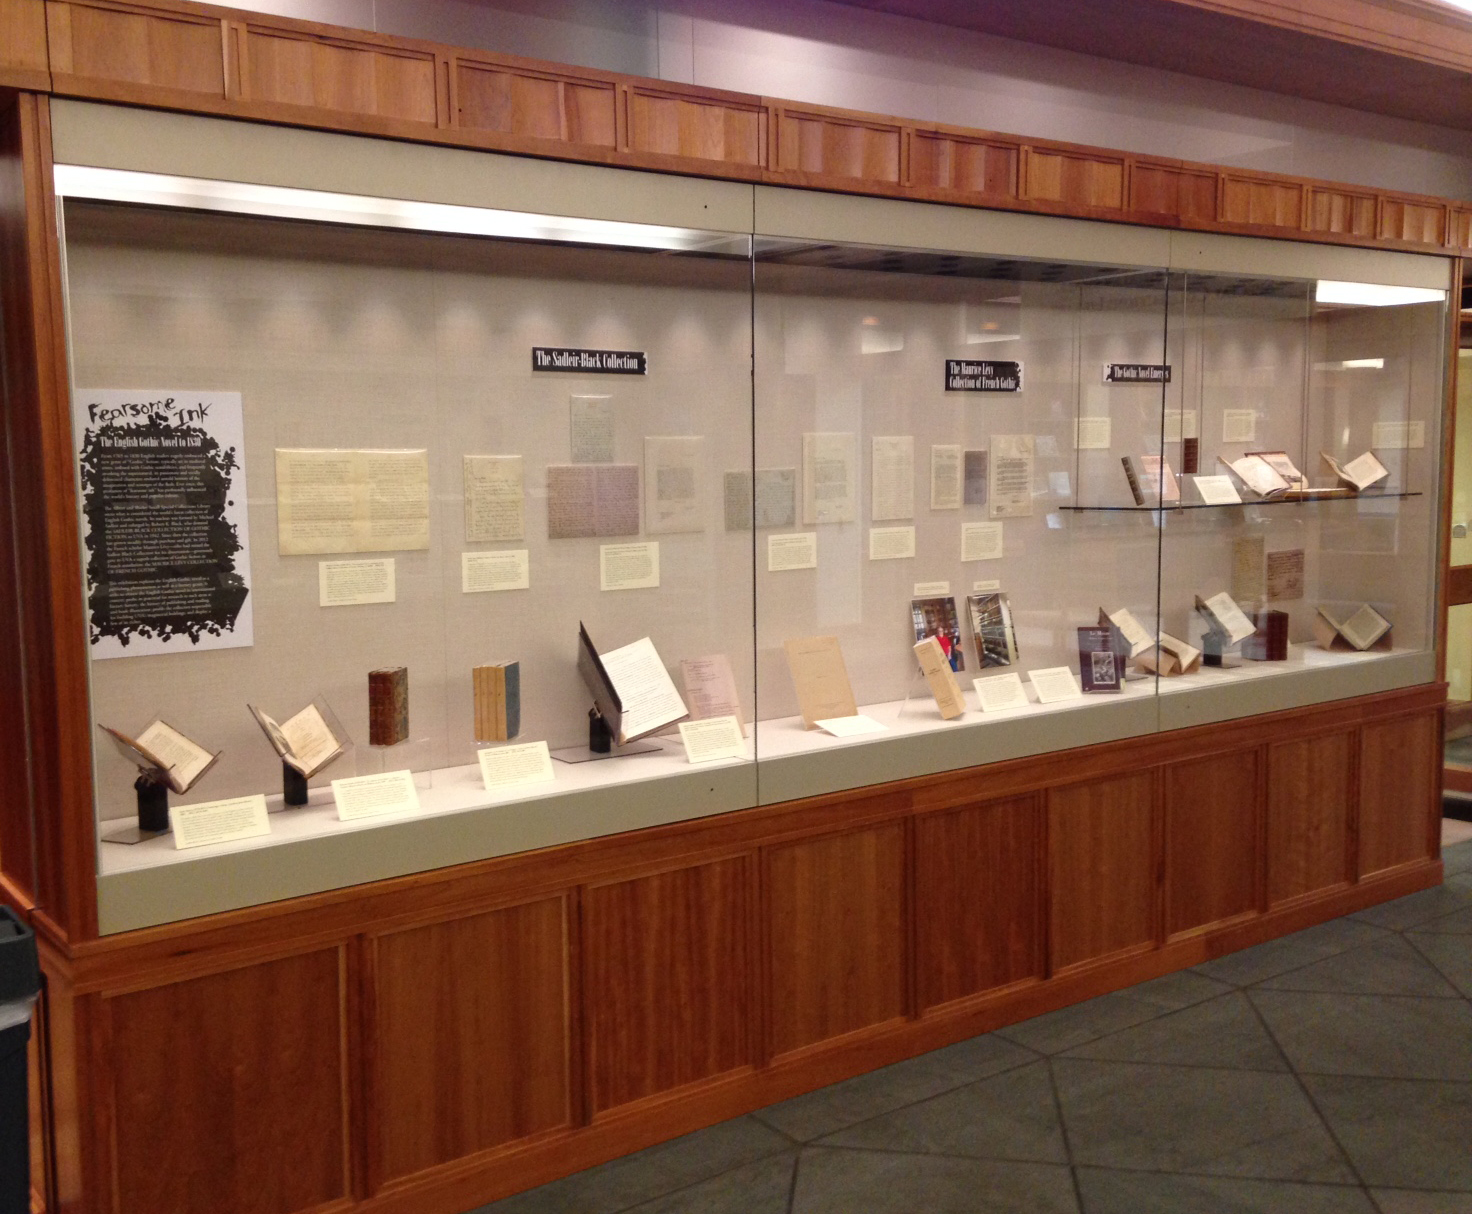 Part of the exhibition, "Fearsome Ink: The English Gothic Novel to 1830," on view through Mat 28.